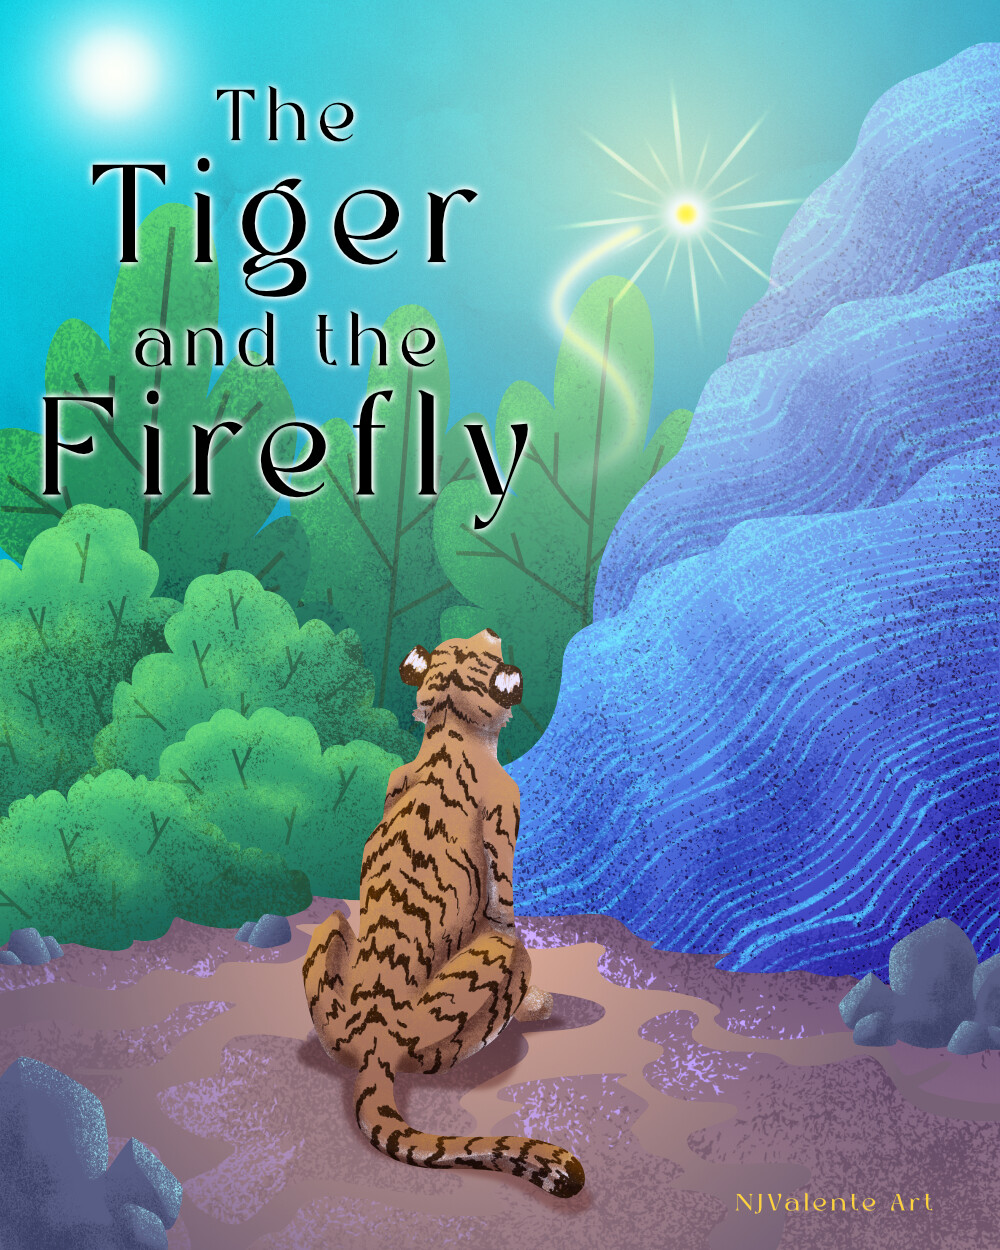 The Tiger and the Firefly book cover design